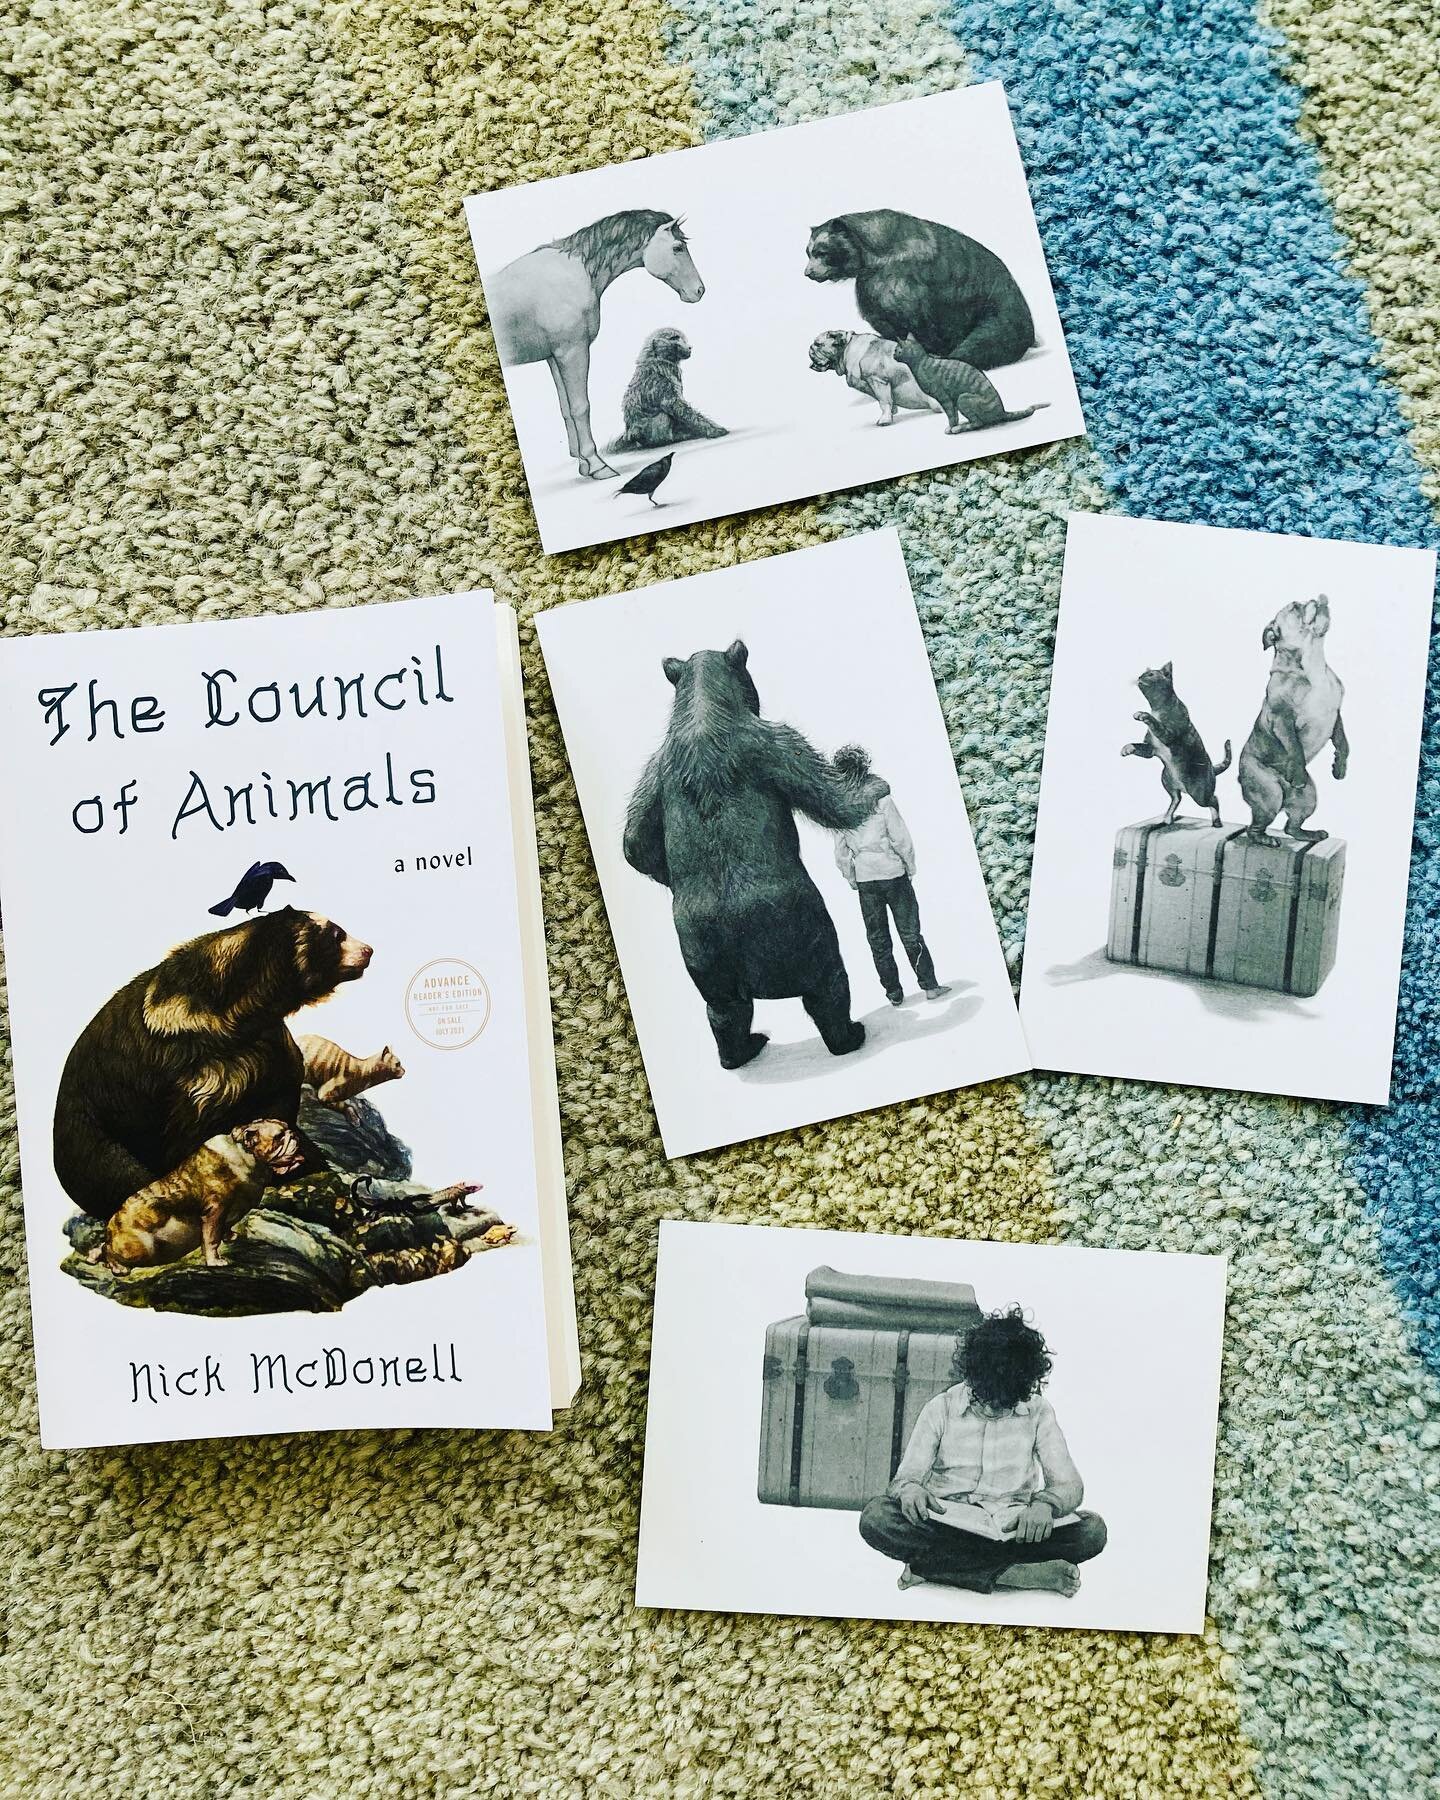 📬SWEEPSTAKES📬 Enter to win a hardcover copy of THE COUNCIL OF ANIMALS *and* a pack of limited edition postcards featuring the illustrations from the book! You can even mail these to a friend as they come complete with space for a stamp and to write